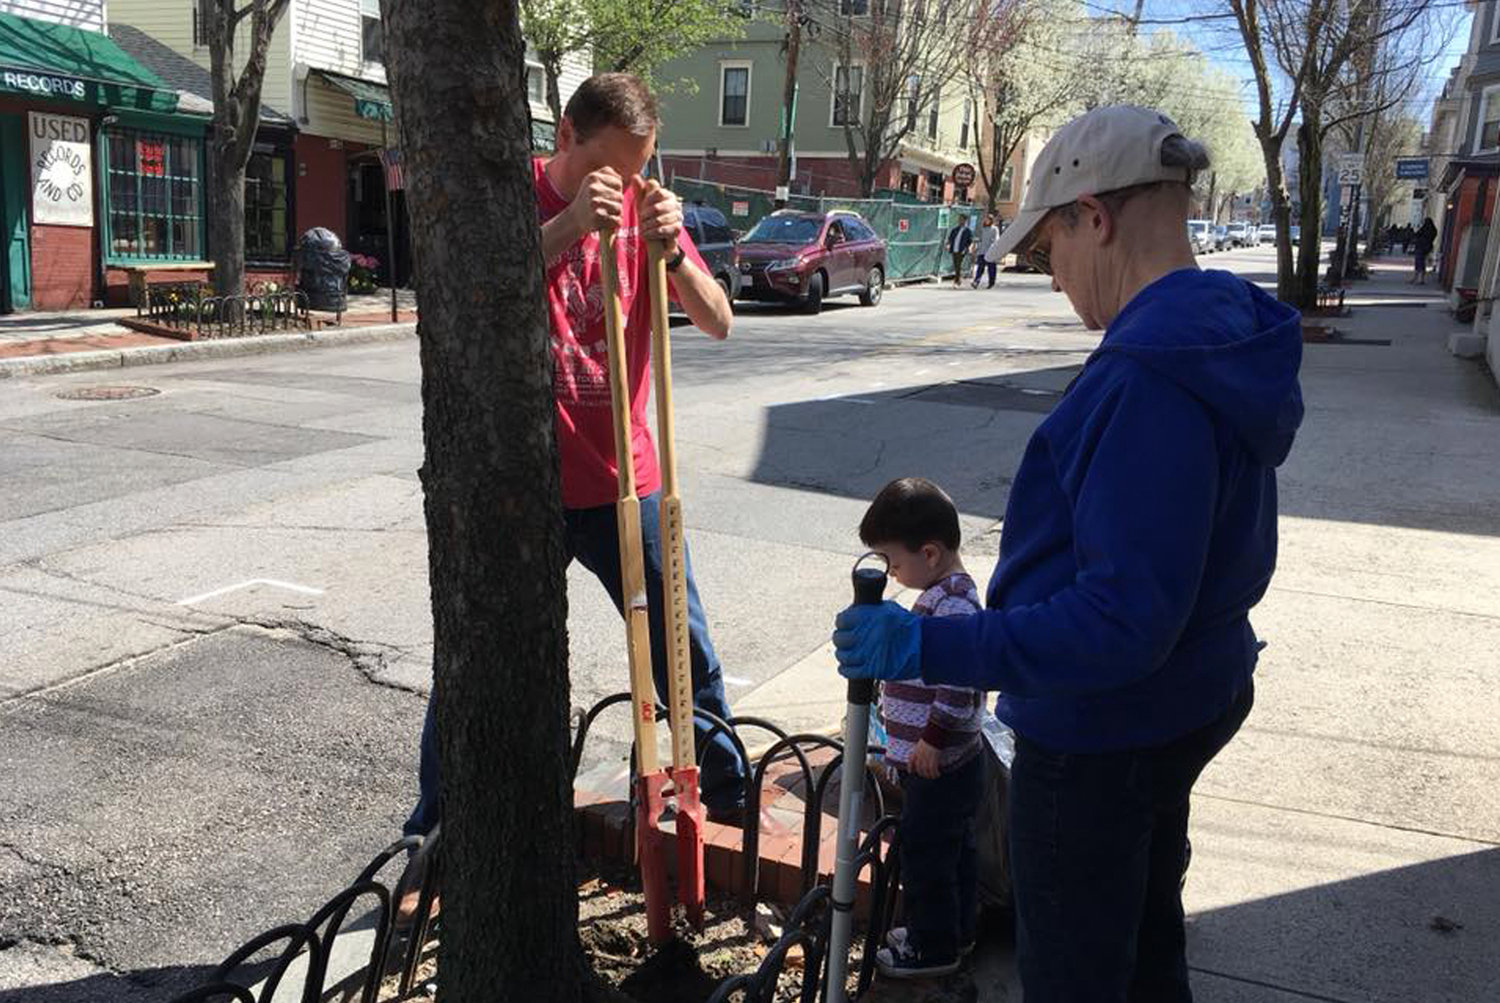 FPNA has openings on its board of directors to participate in neighborhood projects like this Wickenden cleanup for Earth Day and more